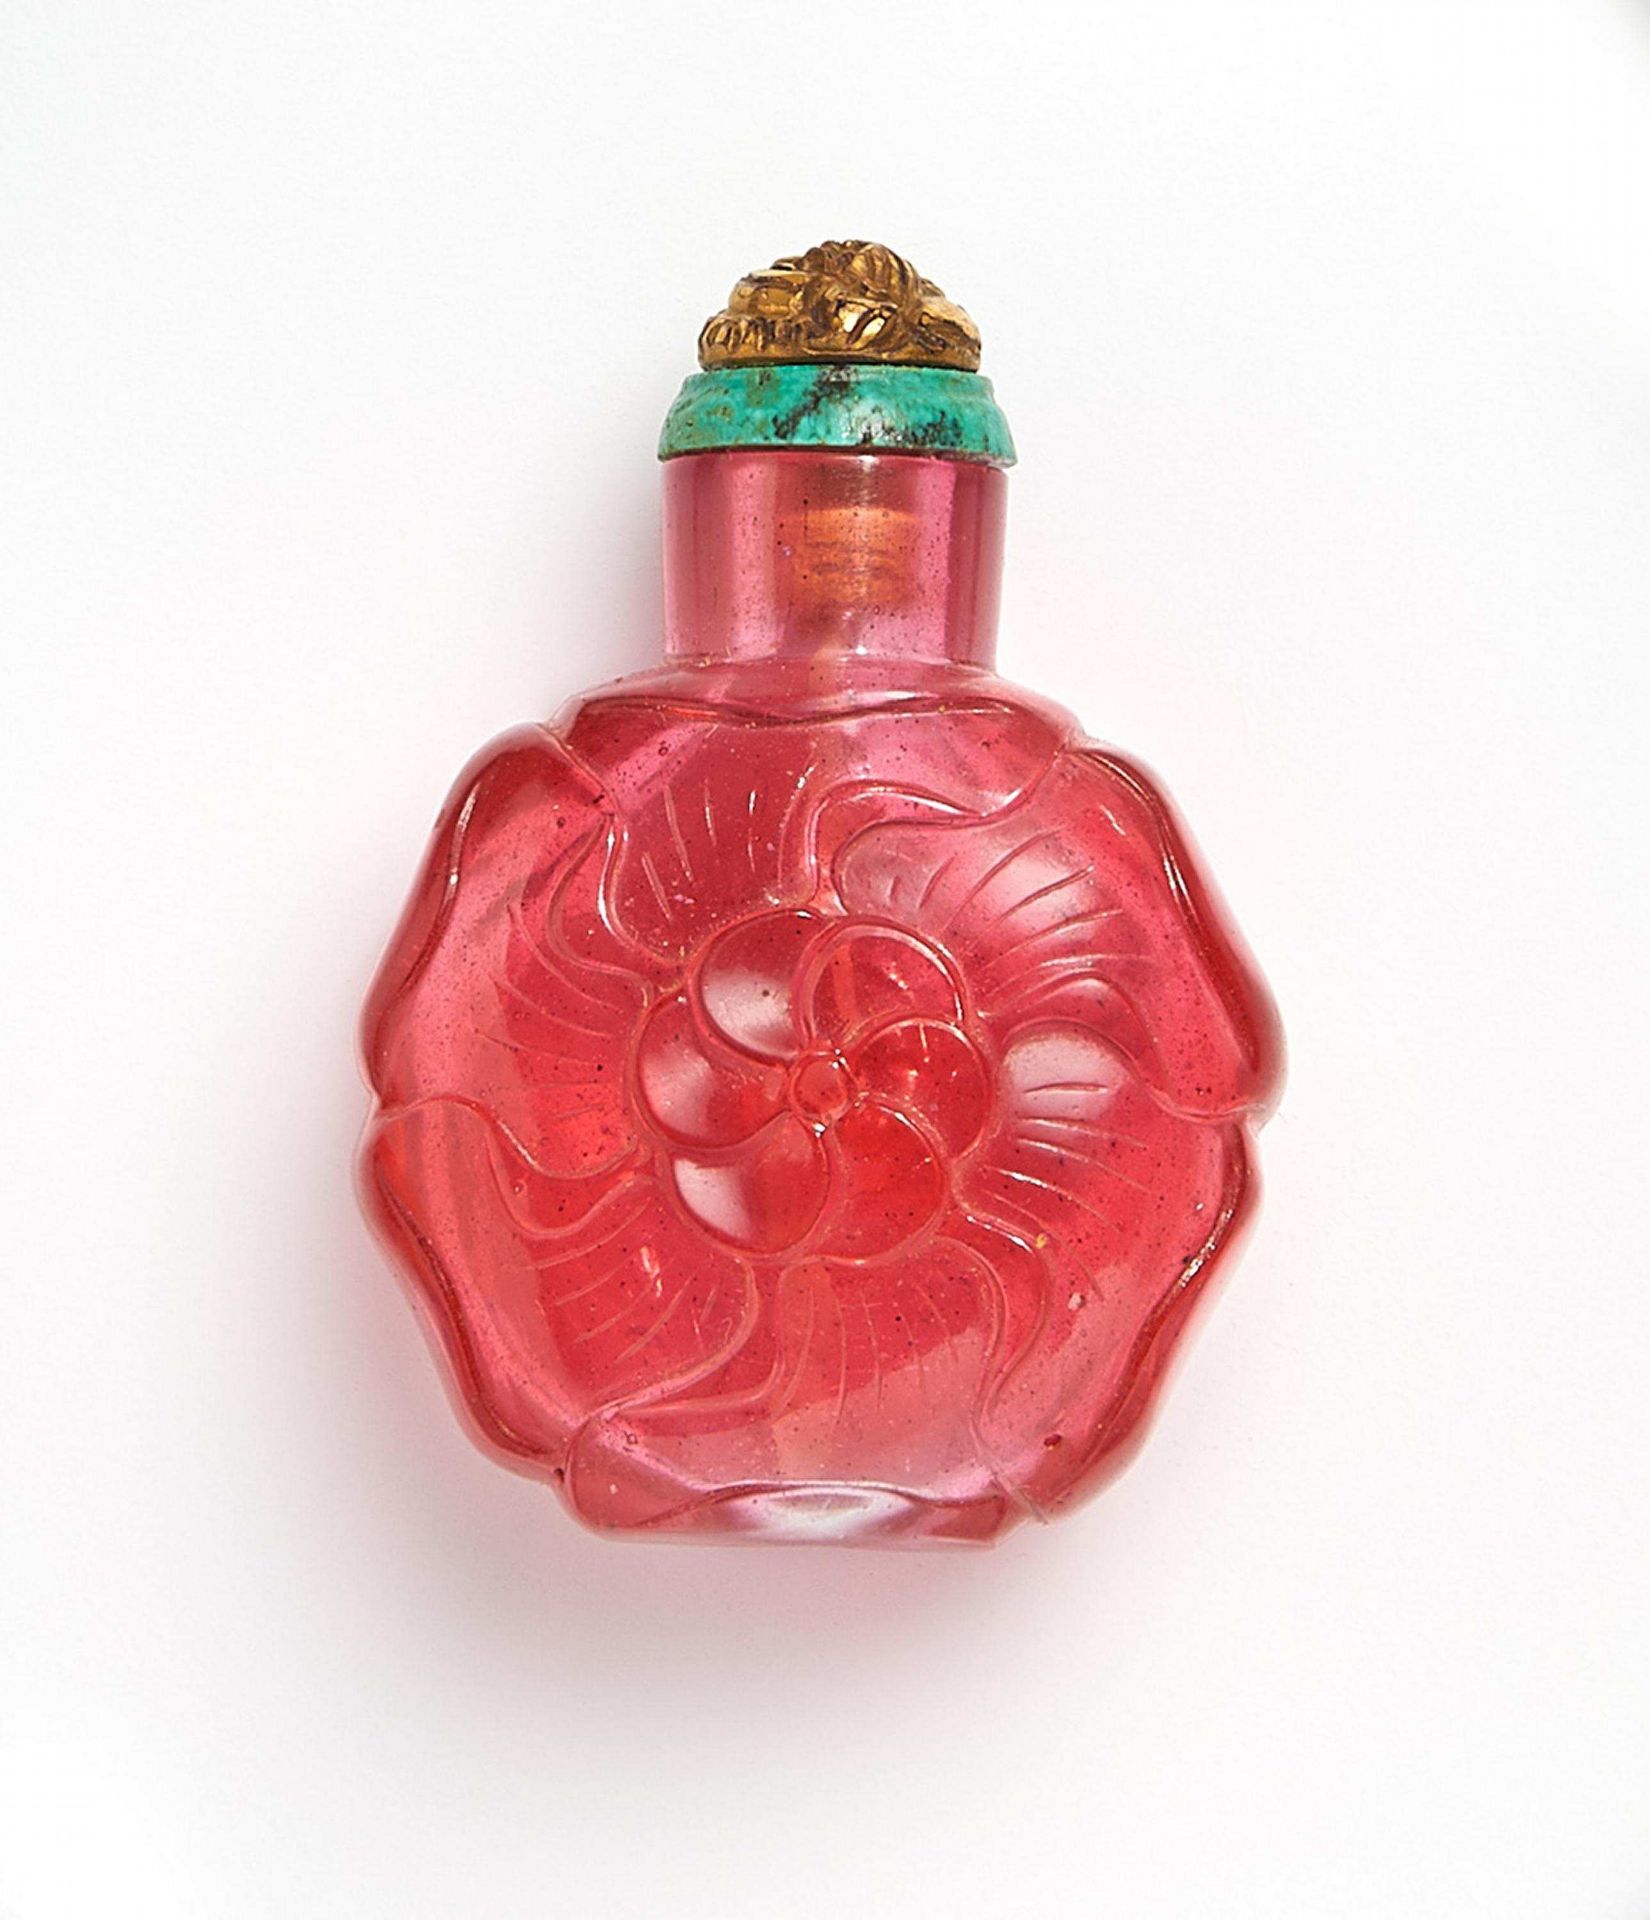 SNUFFBOTTLE WITH MALLOW-FLOWERS. China. Qing dynasty. Ca. 1800-1880. Transparent strawberry red